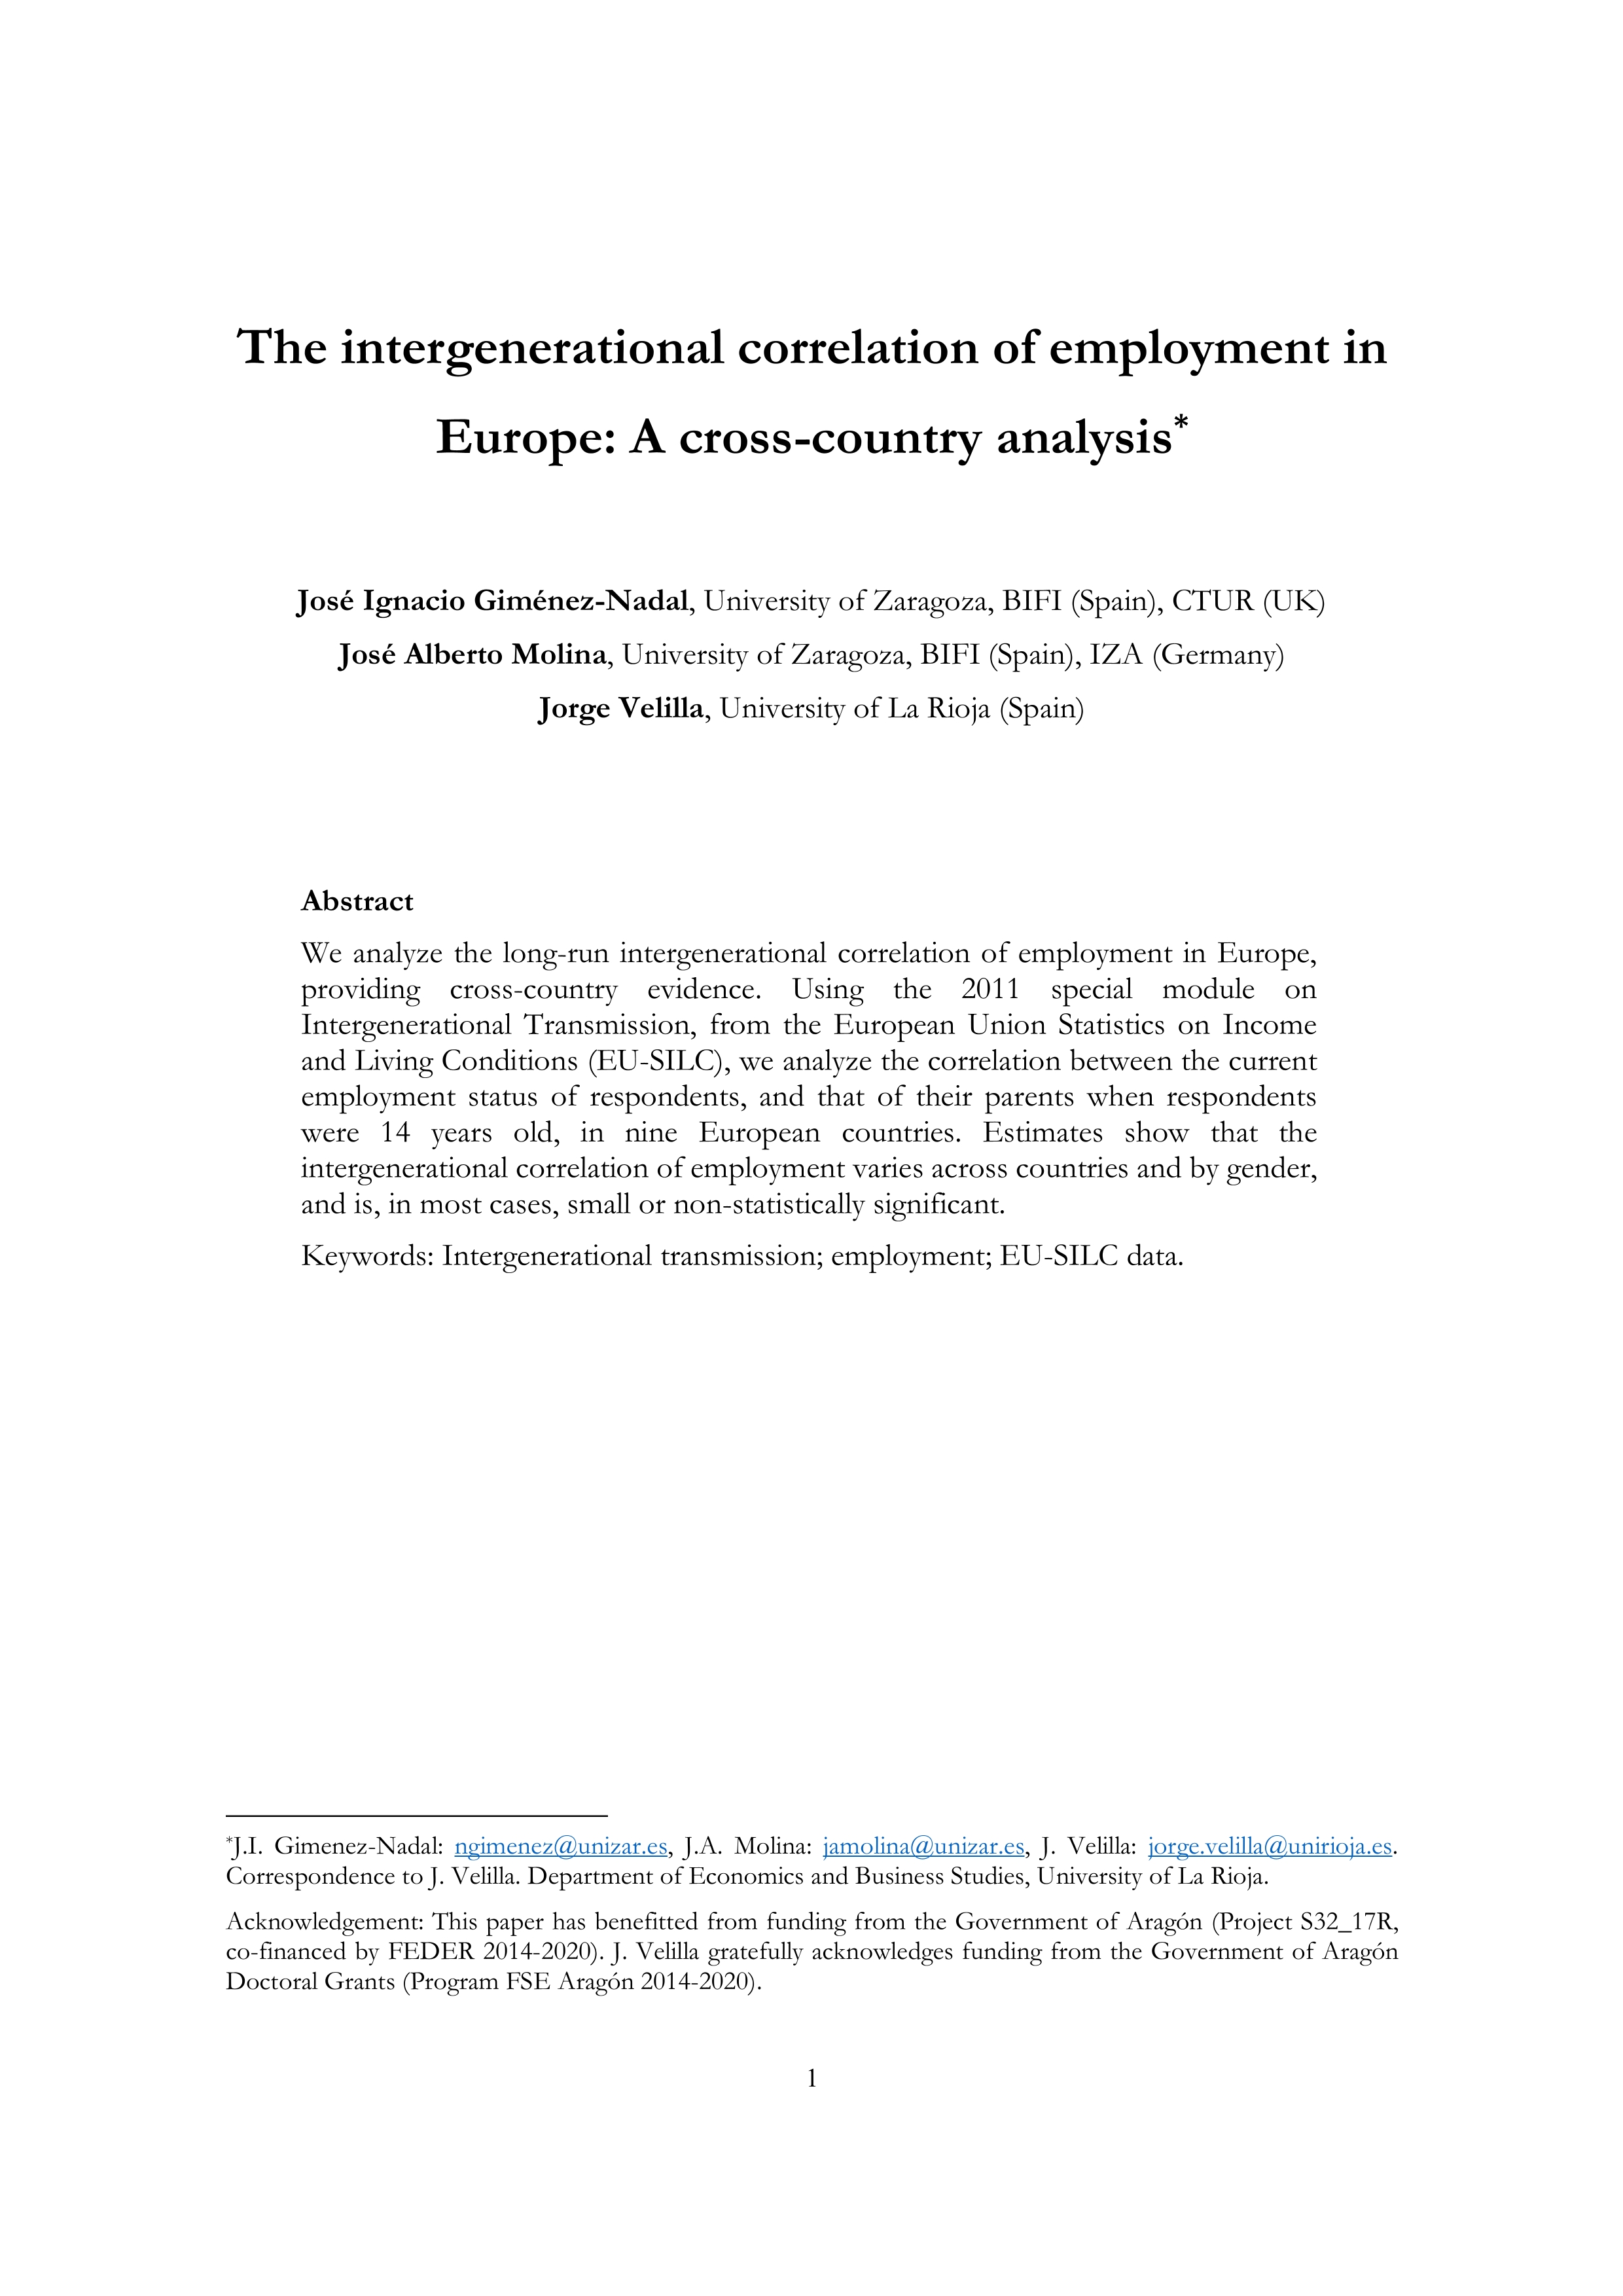 The intergenerational correlation of employment in Europe: a cross-country analysis